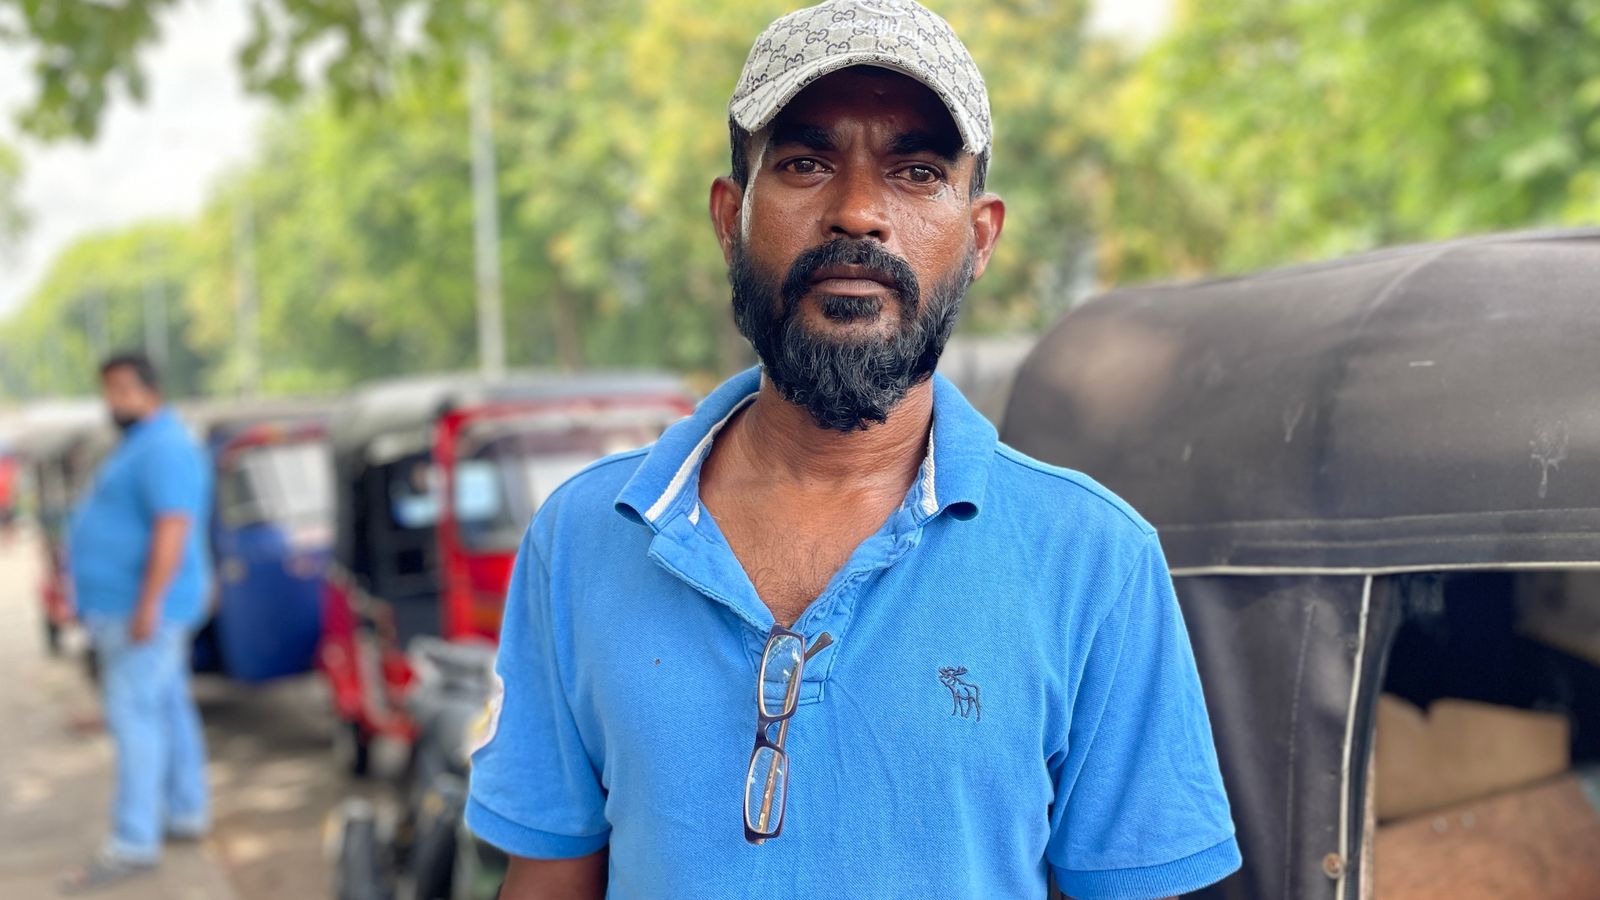 Sri Lanka Crisis Six Mile Daily Walk For Food As Demand For Free Meals Soars And People